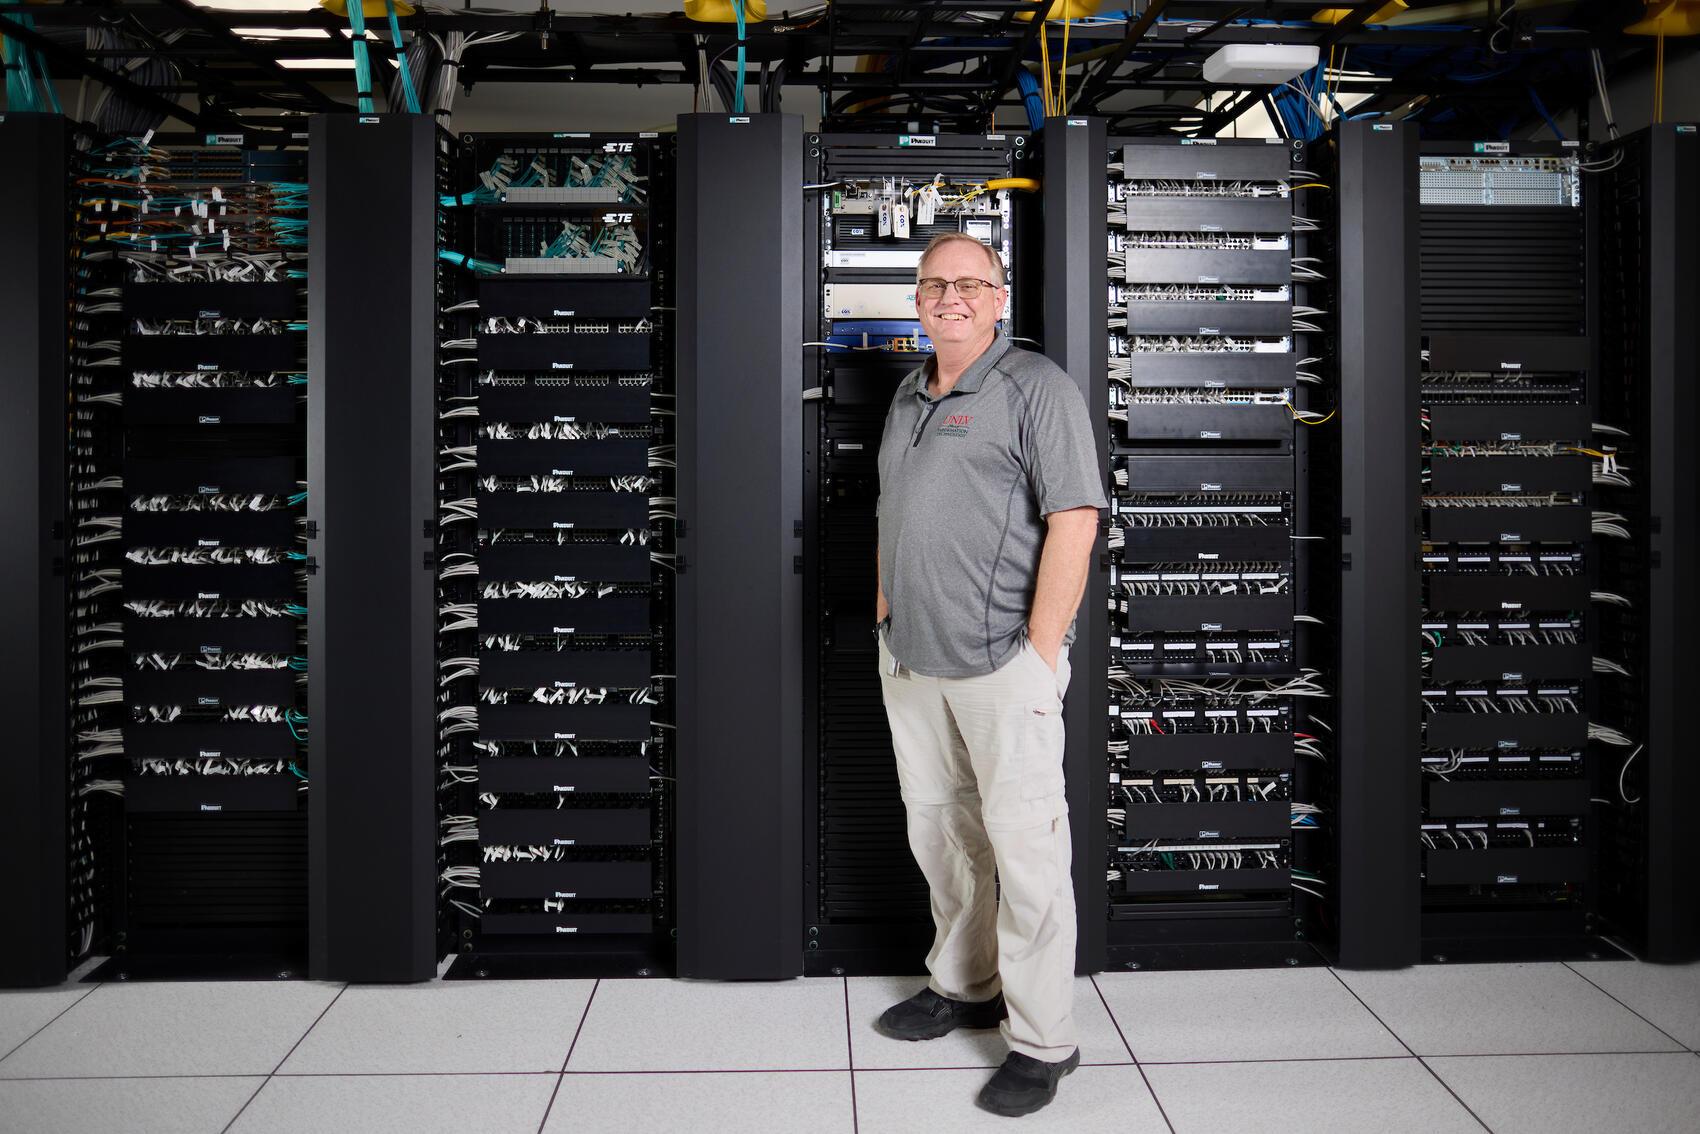 Man standing in front of black data servers.